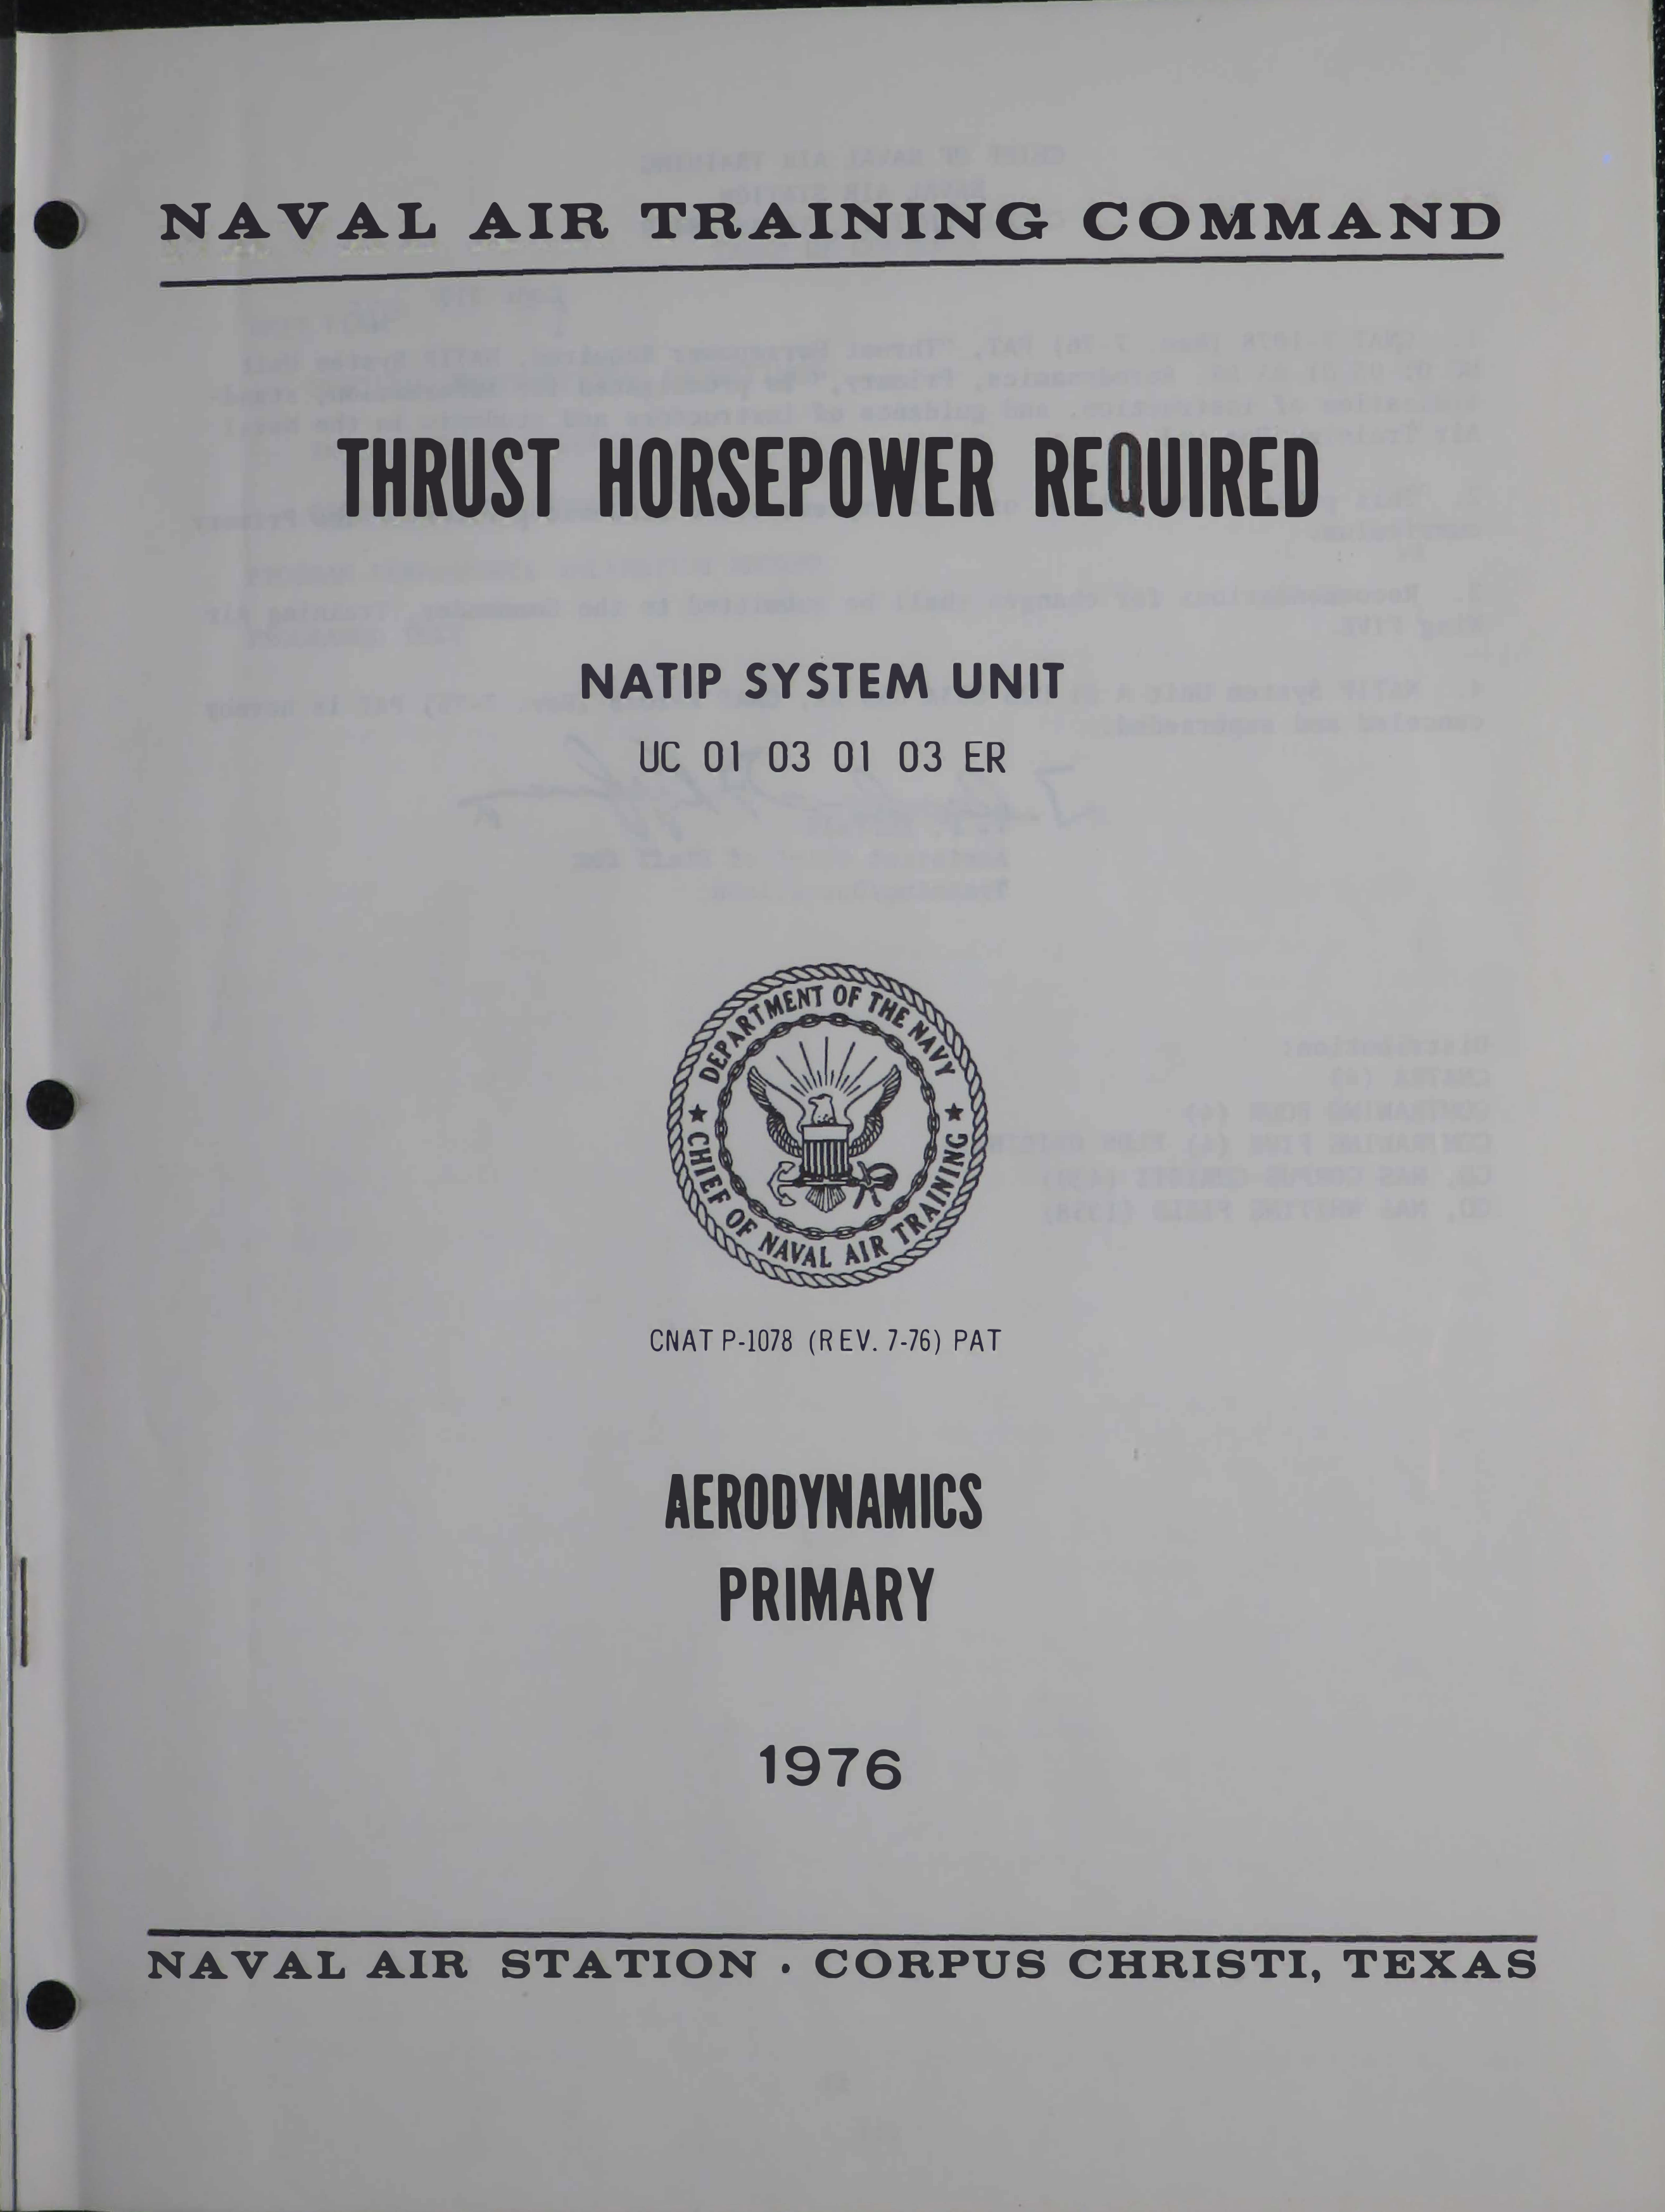 Sample page 1 from AirCorps Library document: Thrust Horsepower Required